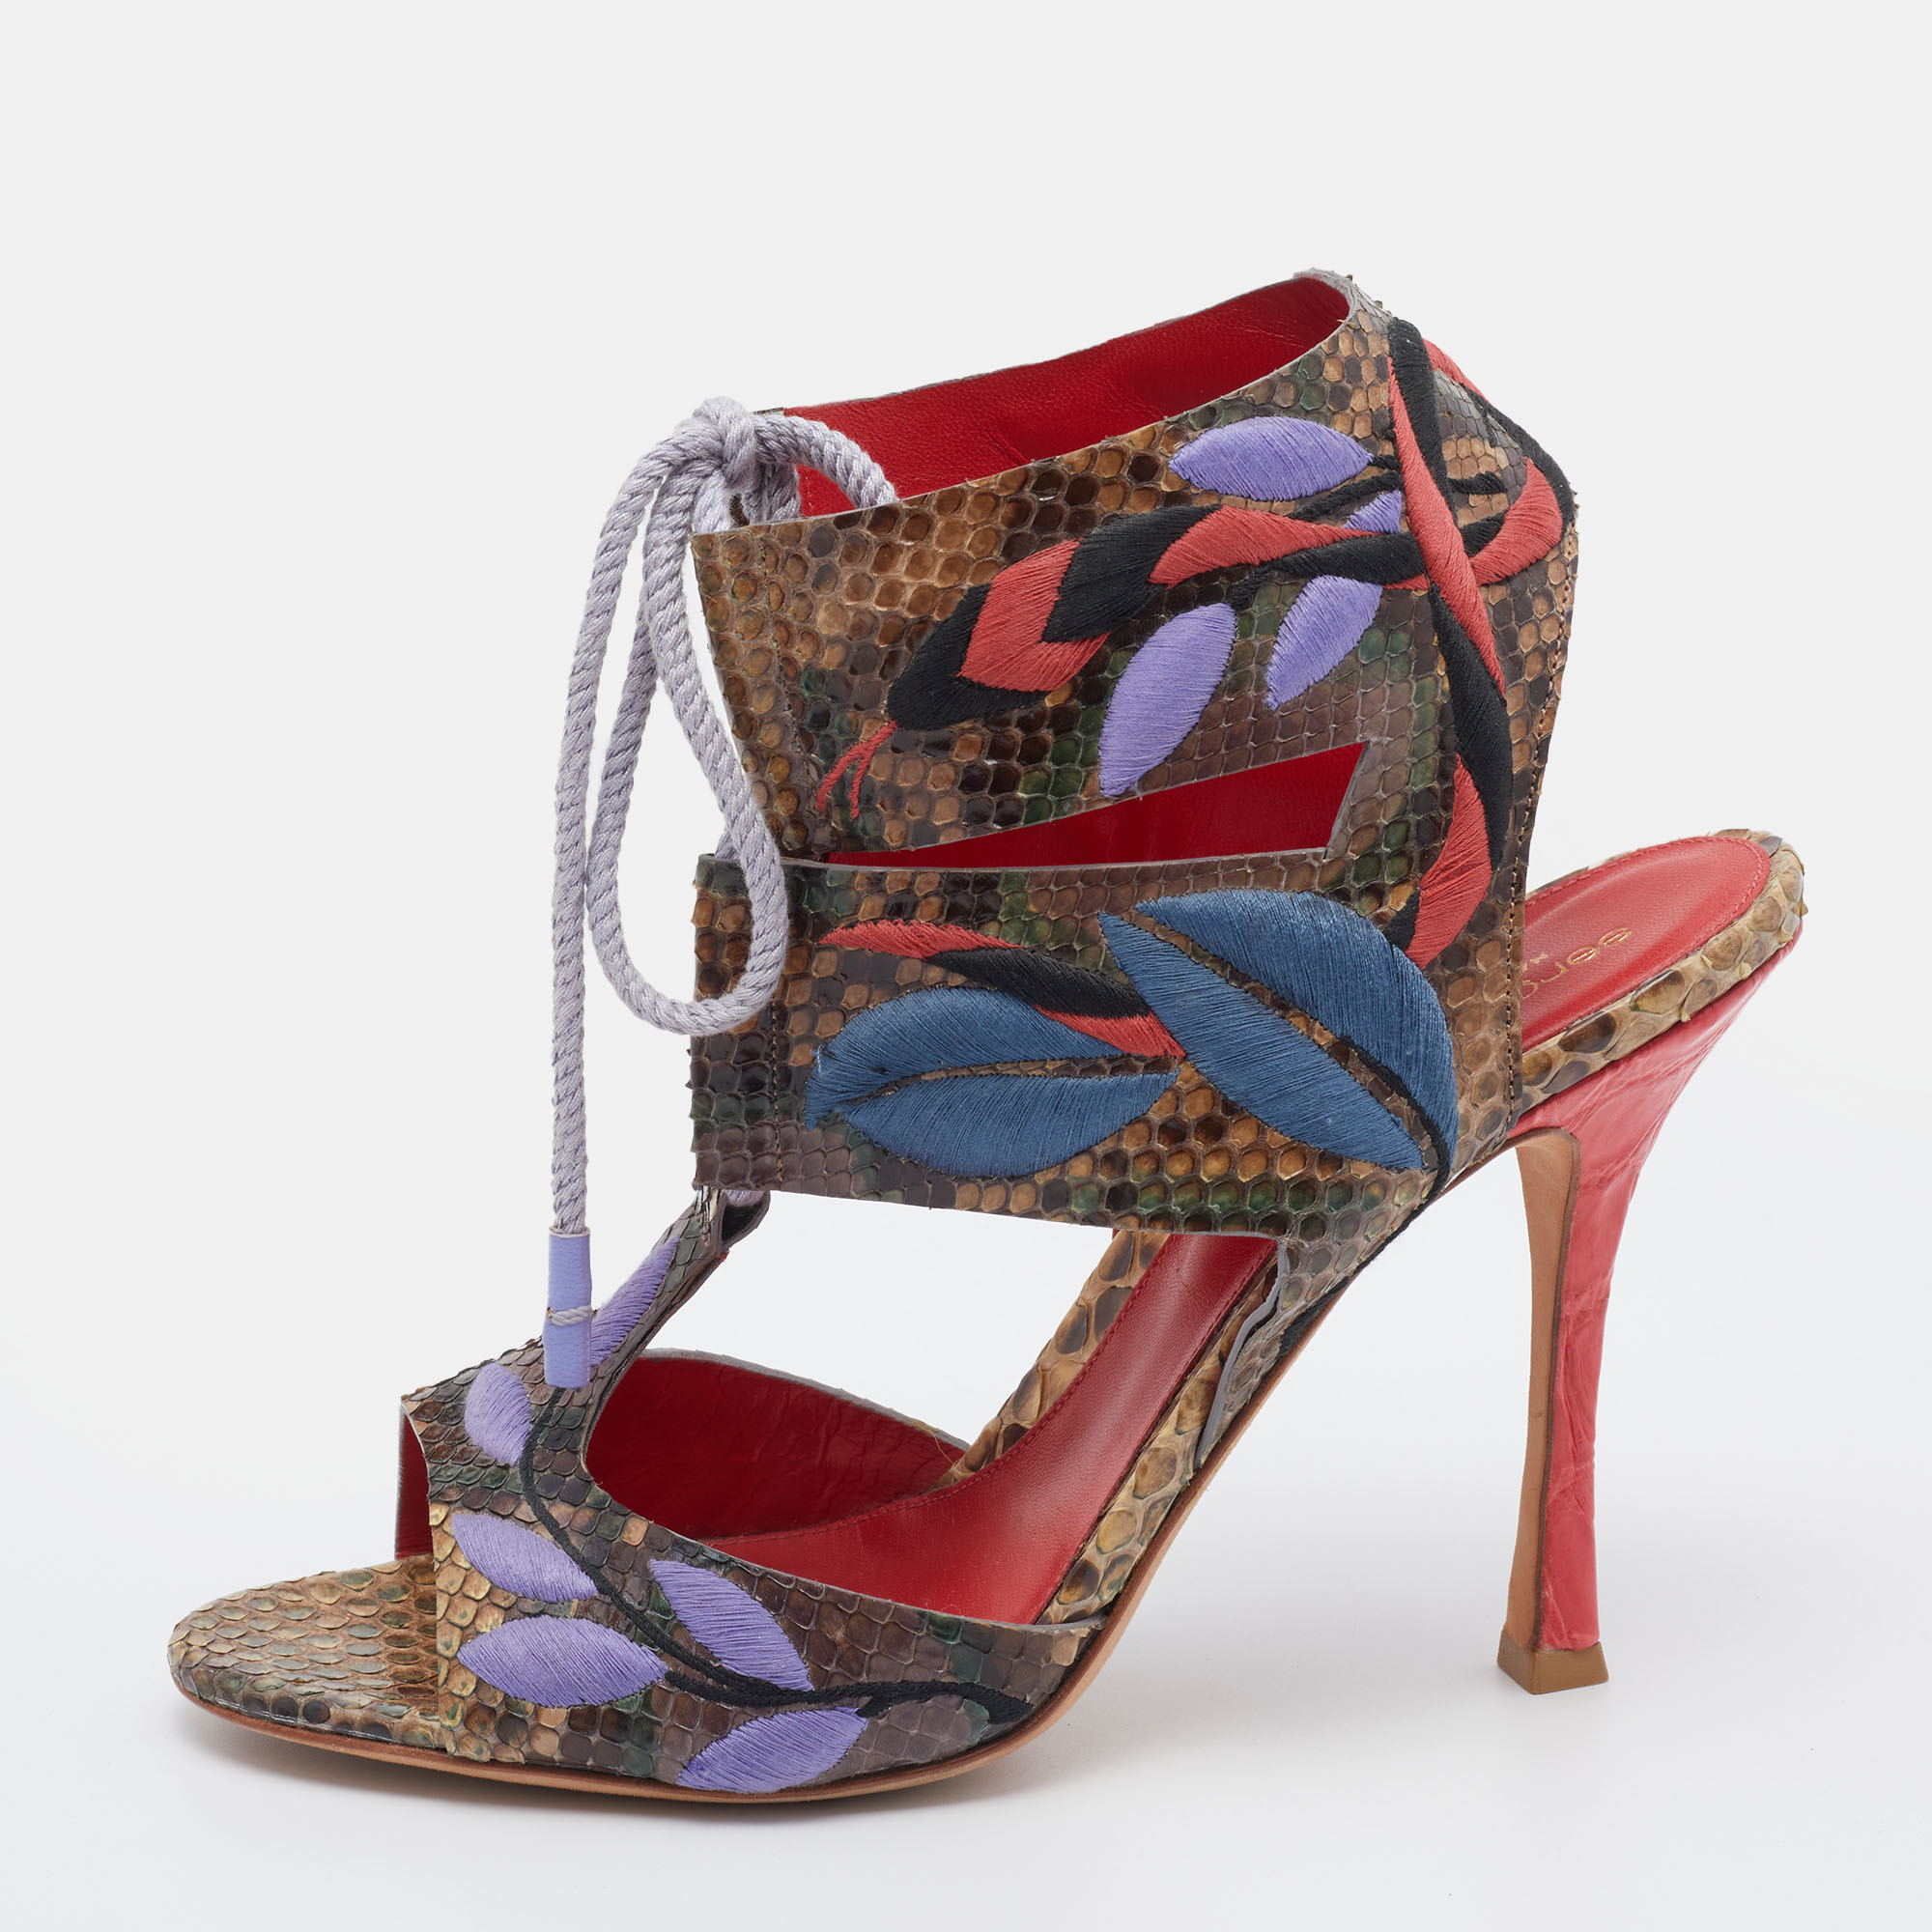 Sergio Rossi Multicolor Embroidered Python Ankle Tie Up Sandals Size 40